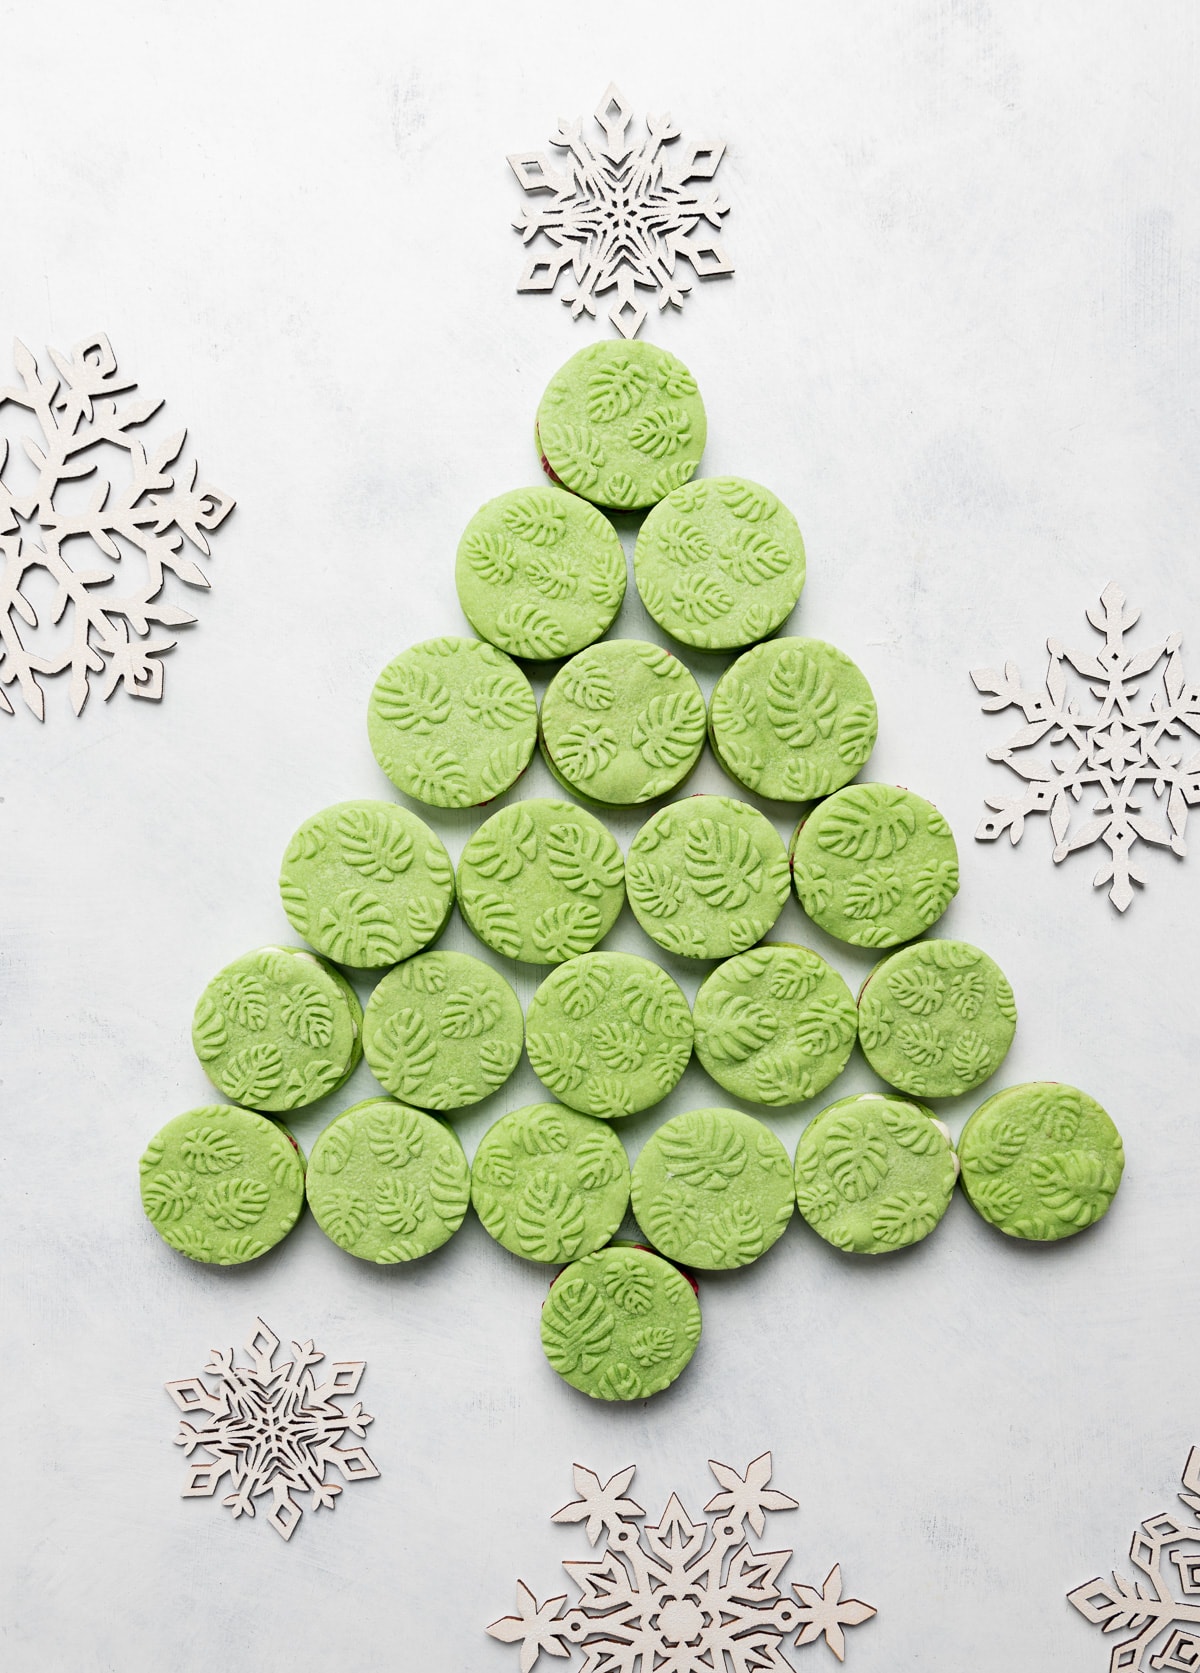 green monstera leaf round cookies arranged to look like a christmas tree with white wooden snowflakes